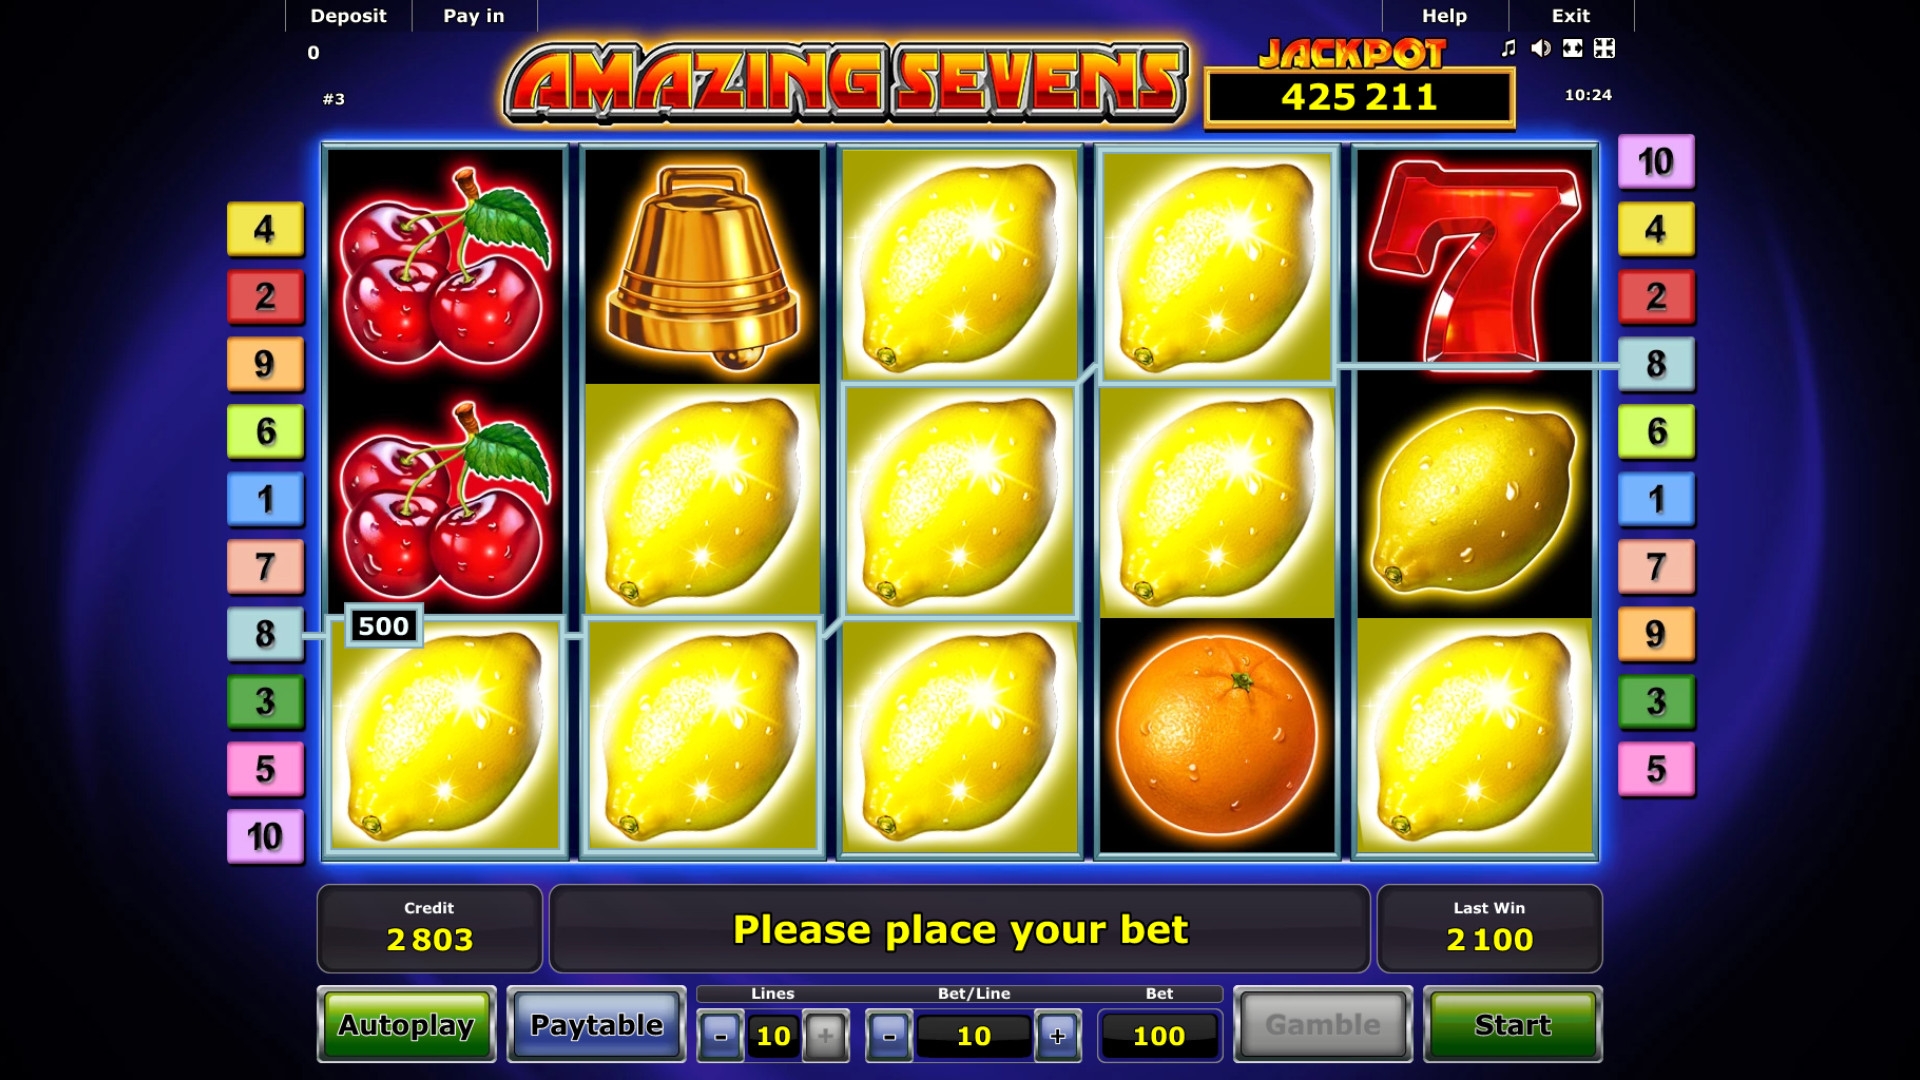 Amazing Sevens (Amazing Sevens) from category Slots